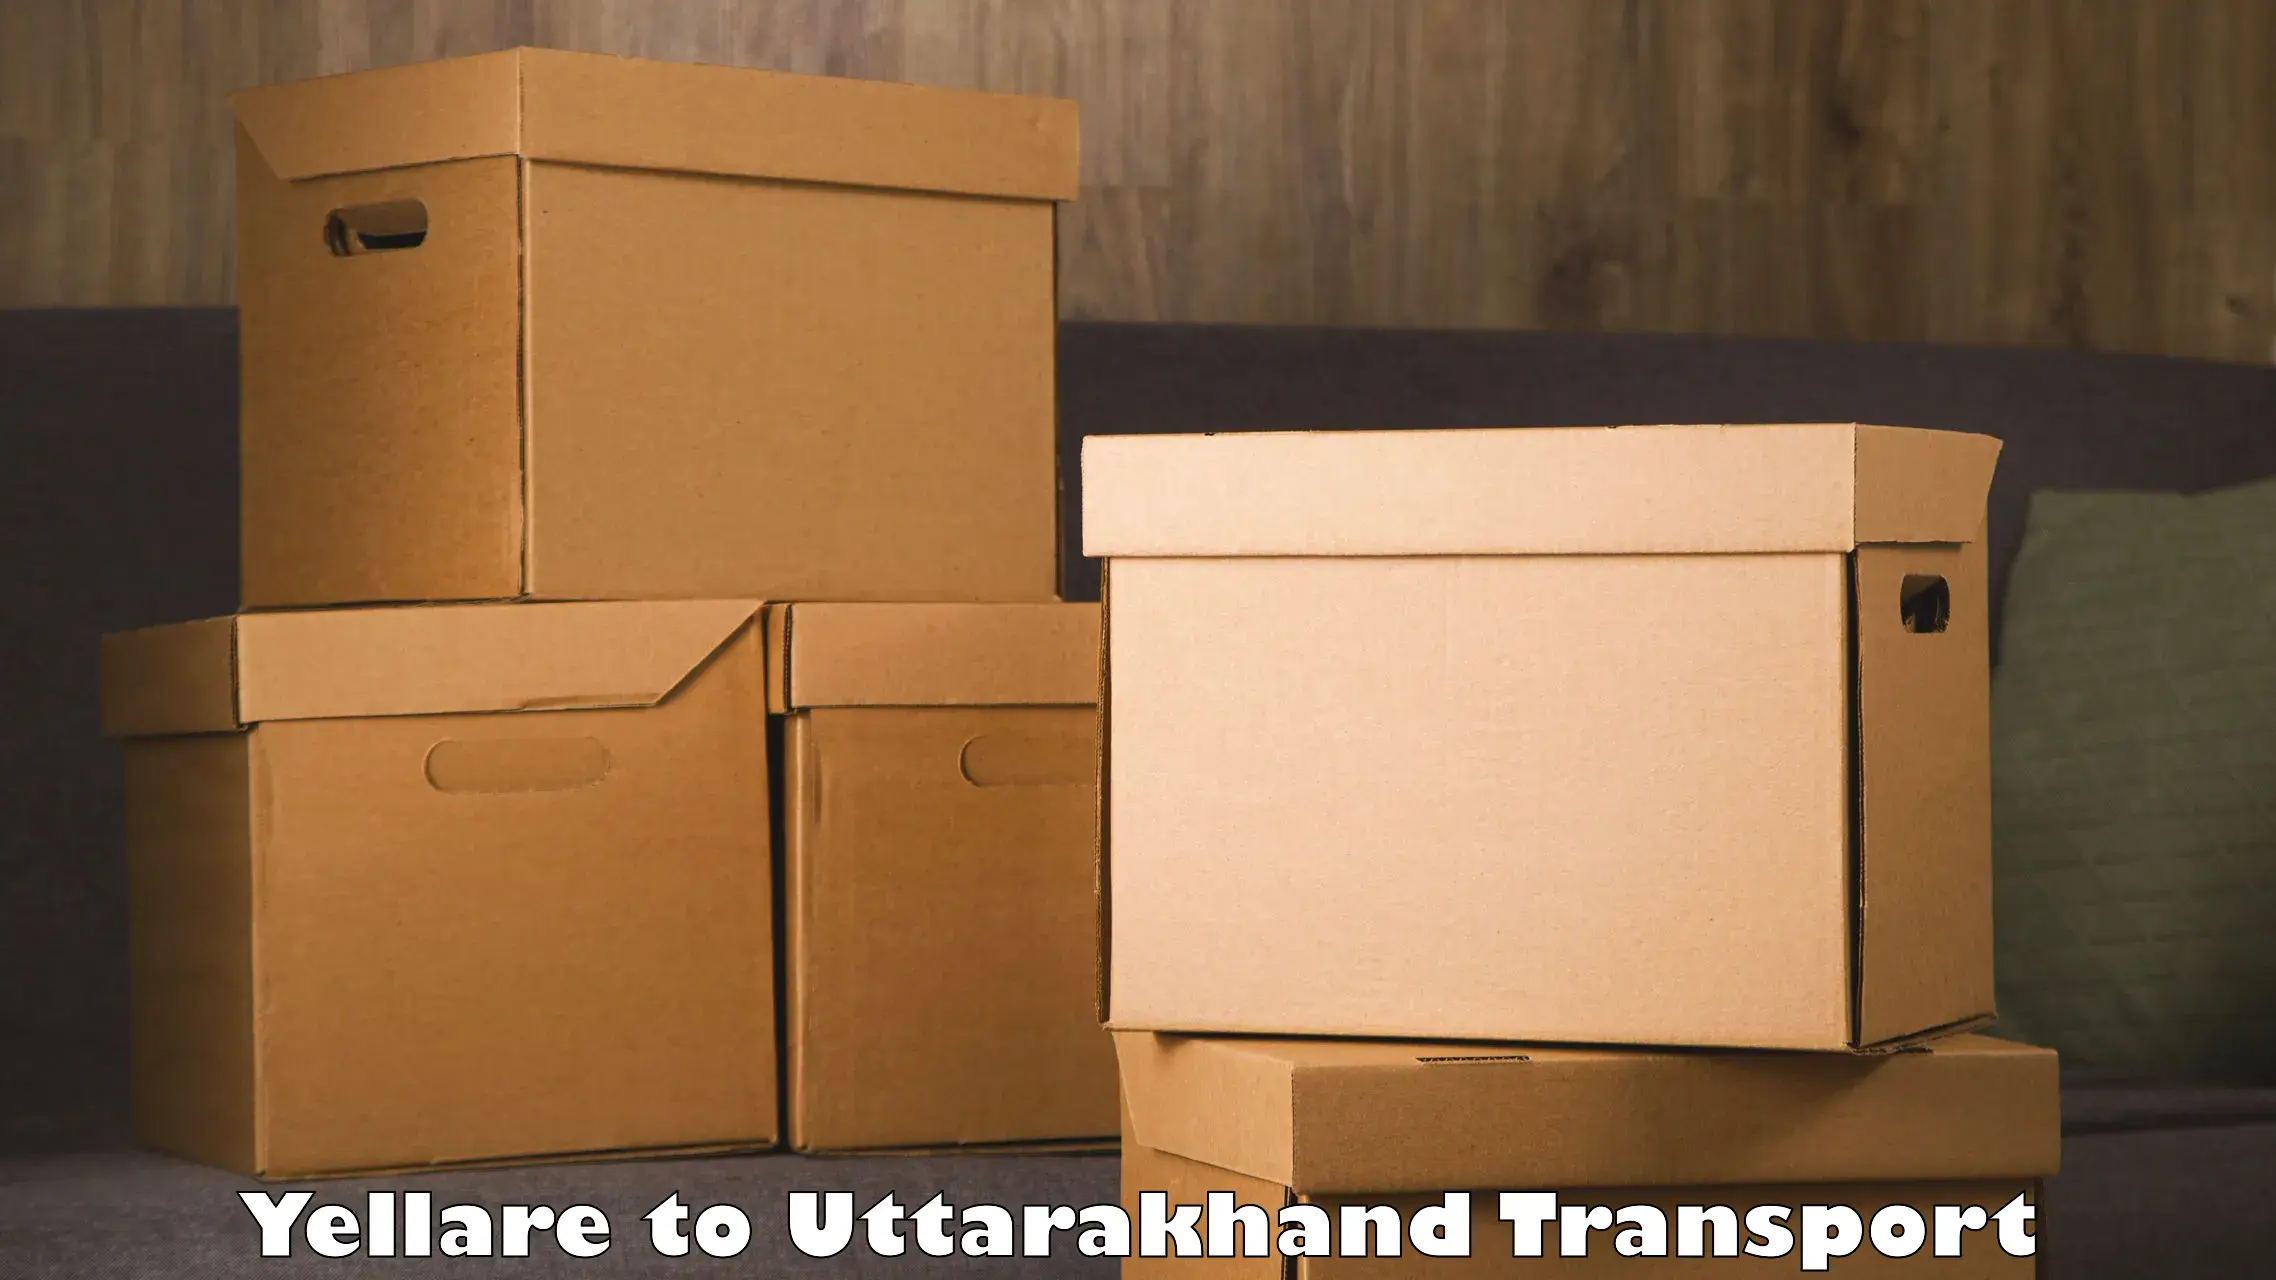 Truck transport companies in India Yellare to Dwarahat